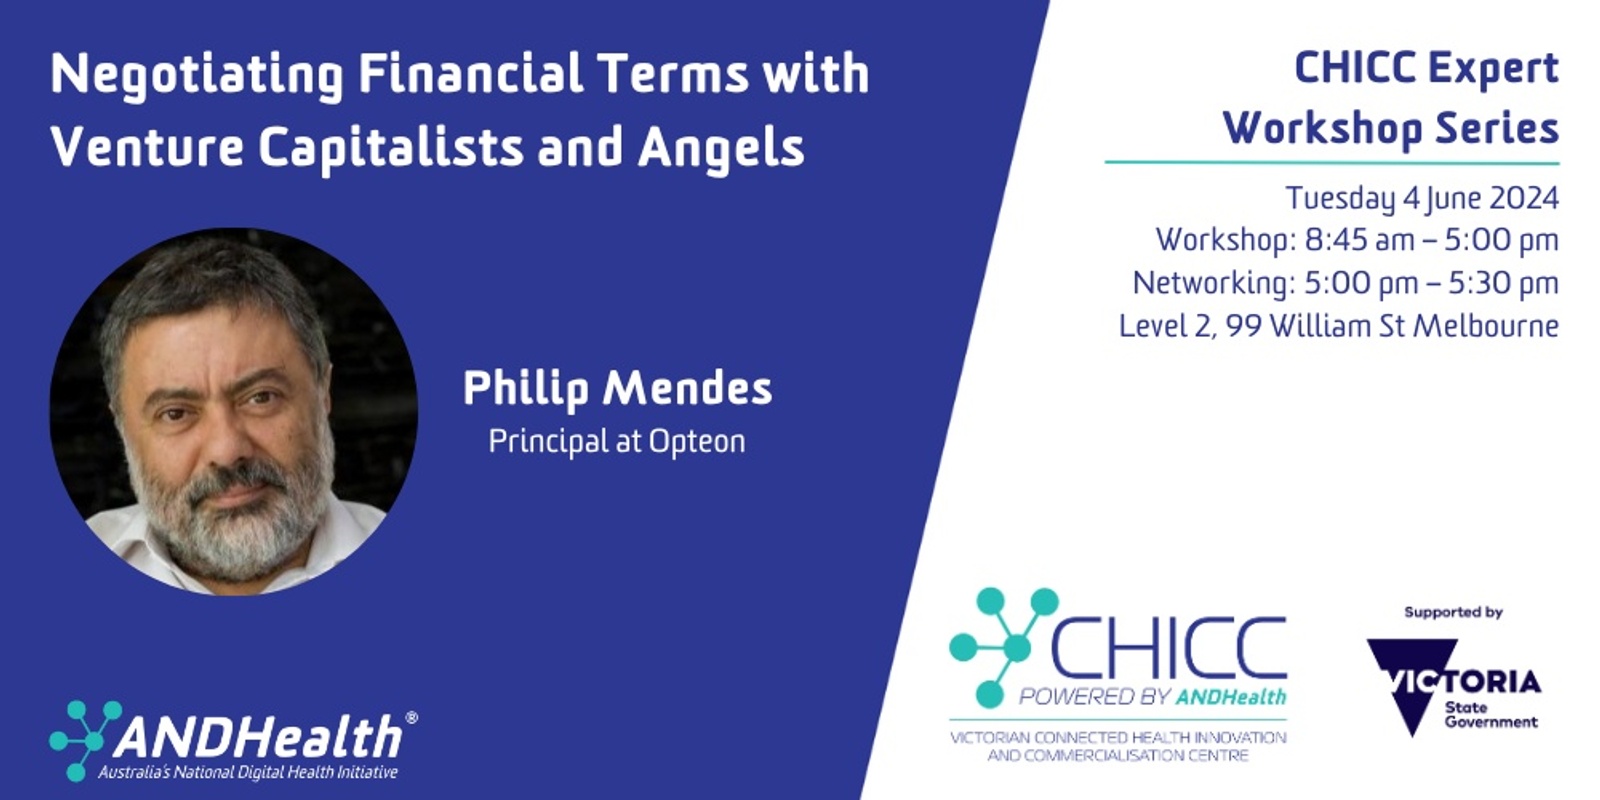 Banner image for CHICC Expert Workshop: Negotiating Financial Terms with Venture Capitalists and Angels 